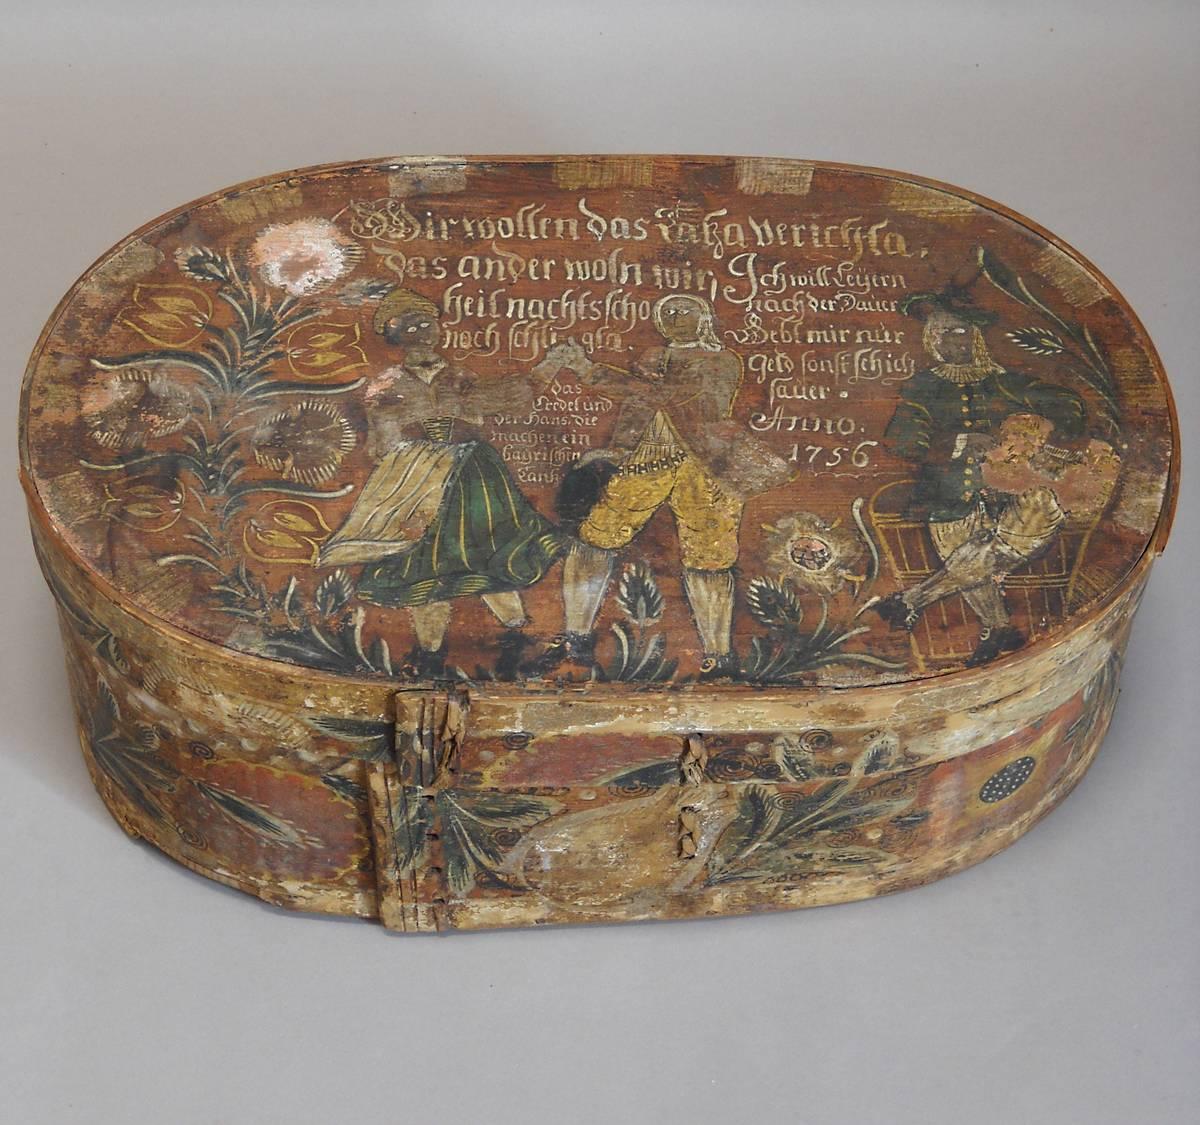 Beautifully painted German bride’s box dated 1756. On the top are pictured two dancers described as “Gredel and Hans make a Bavarian dance,” and a musician with a zither. The couple say, “We want to dance. That way, we can still be close at night.”